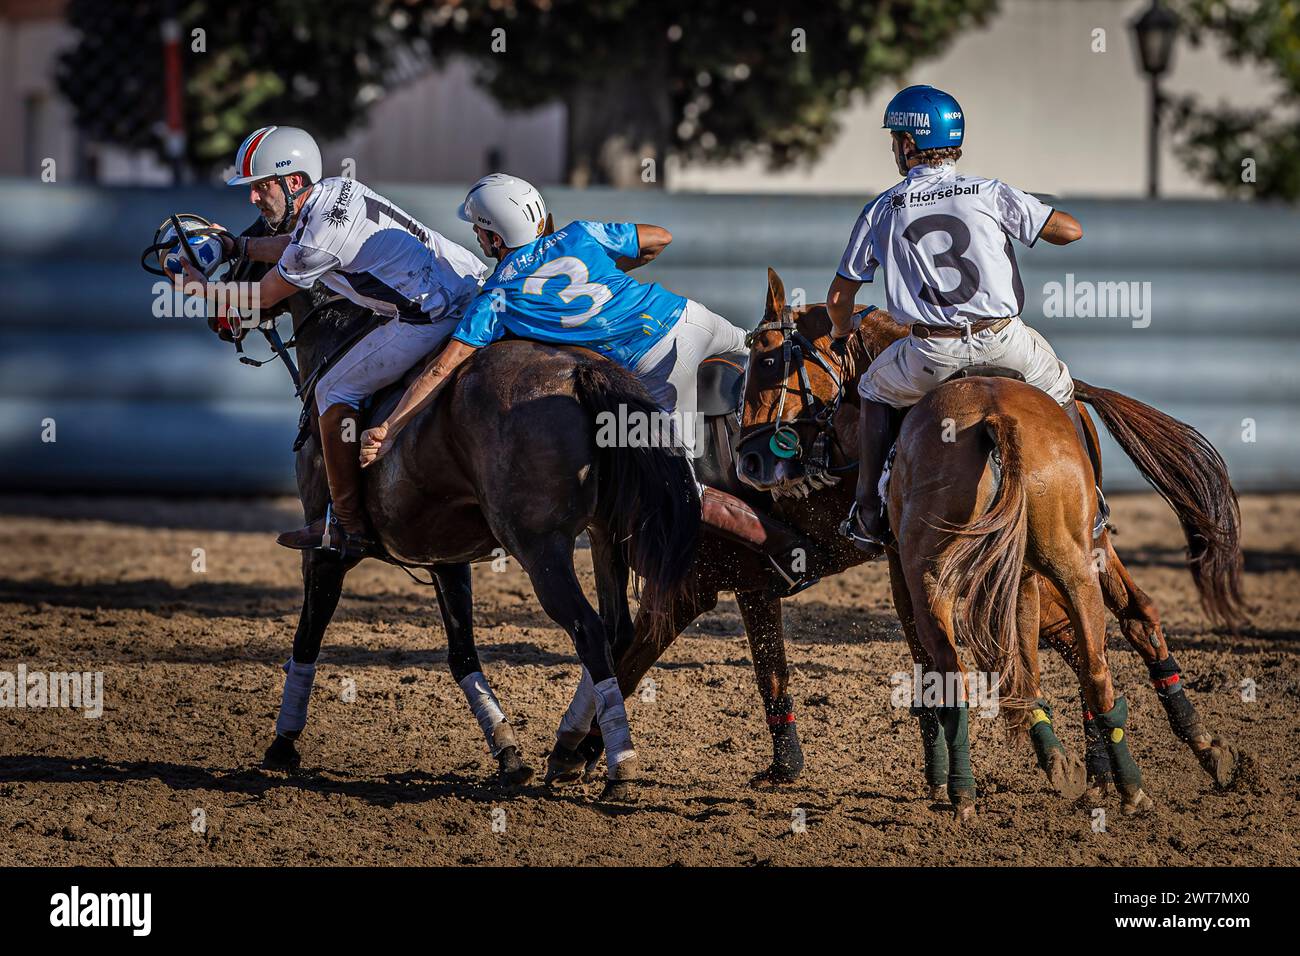 Buenos Aires, Argentina. 7th Mar, 2024. France's Nicolas Thiessard (L) and Mexico's Jose Luis Nieto (R) seen in action with Argentina's Justo Bermudez of Sierra de los Padres (C) during the Open Horseball Argentina, held at the Regimiento de Granaderos a Caballo. The International Tournament ''Open Horseball Argentina'' was played at the Regimiento de Granaderos a Caballo General San MartÃ-n, in the city of Buenos Aires, on March 7, 8 and 9 for promotional purposes. It was the prelude to the Horseball World Championship 2025 to be held in Argentina. Three matches were played on each date. The Stock Photo